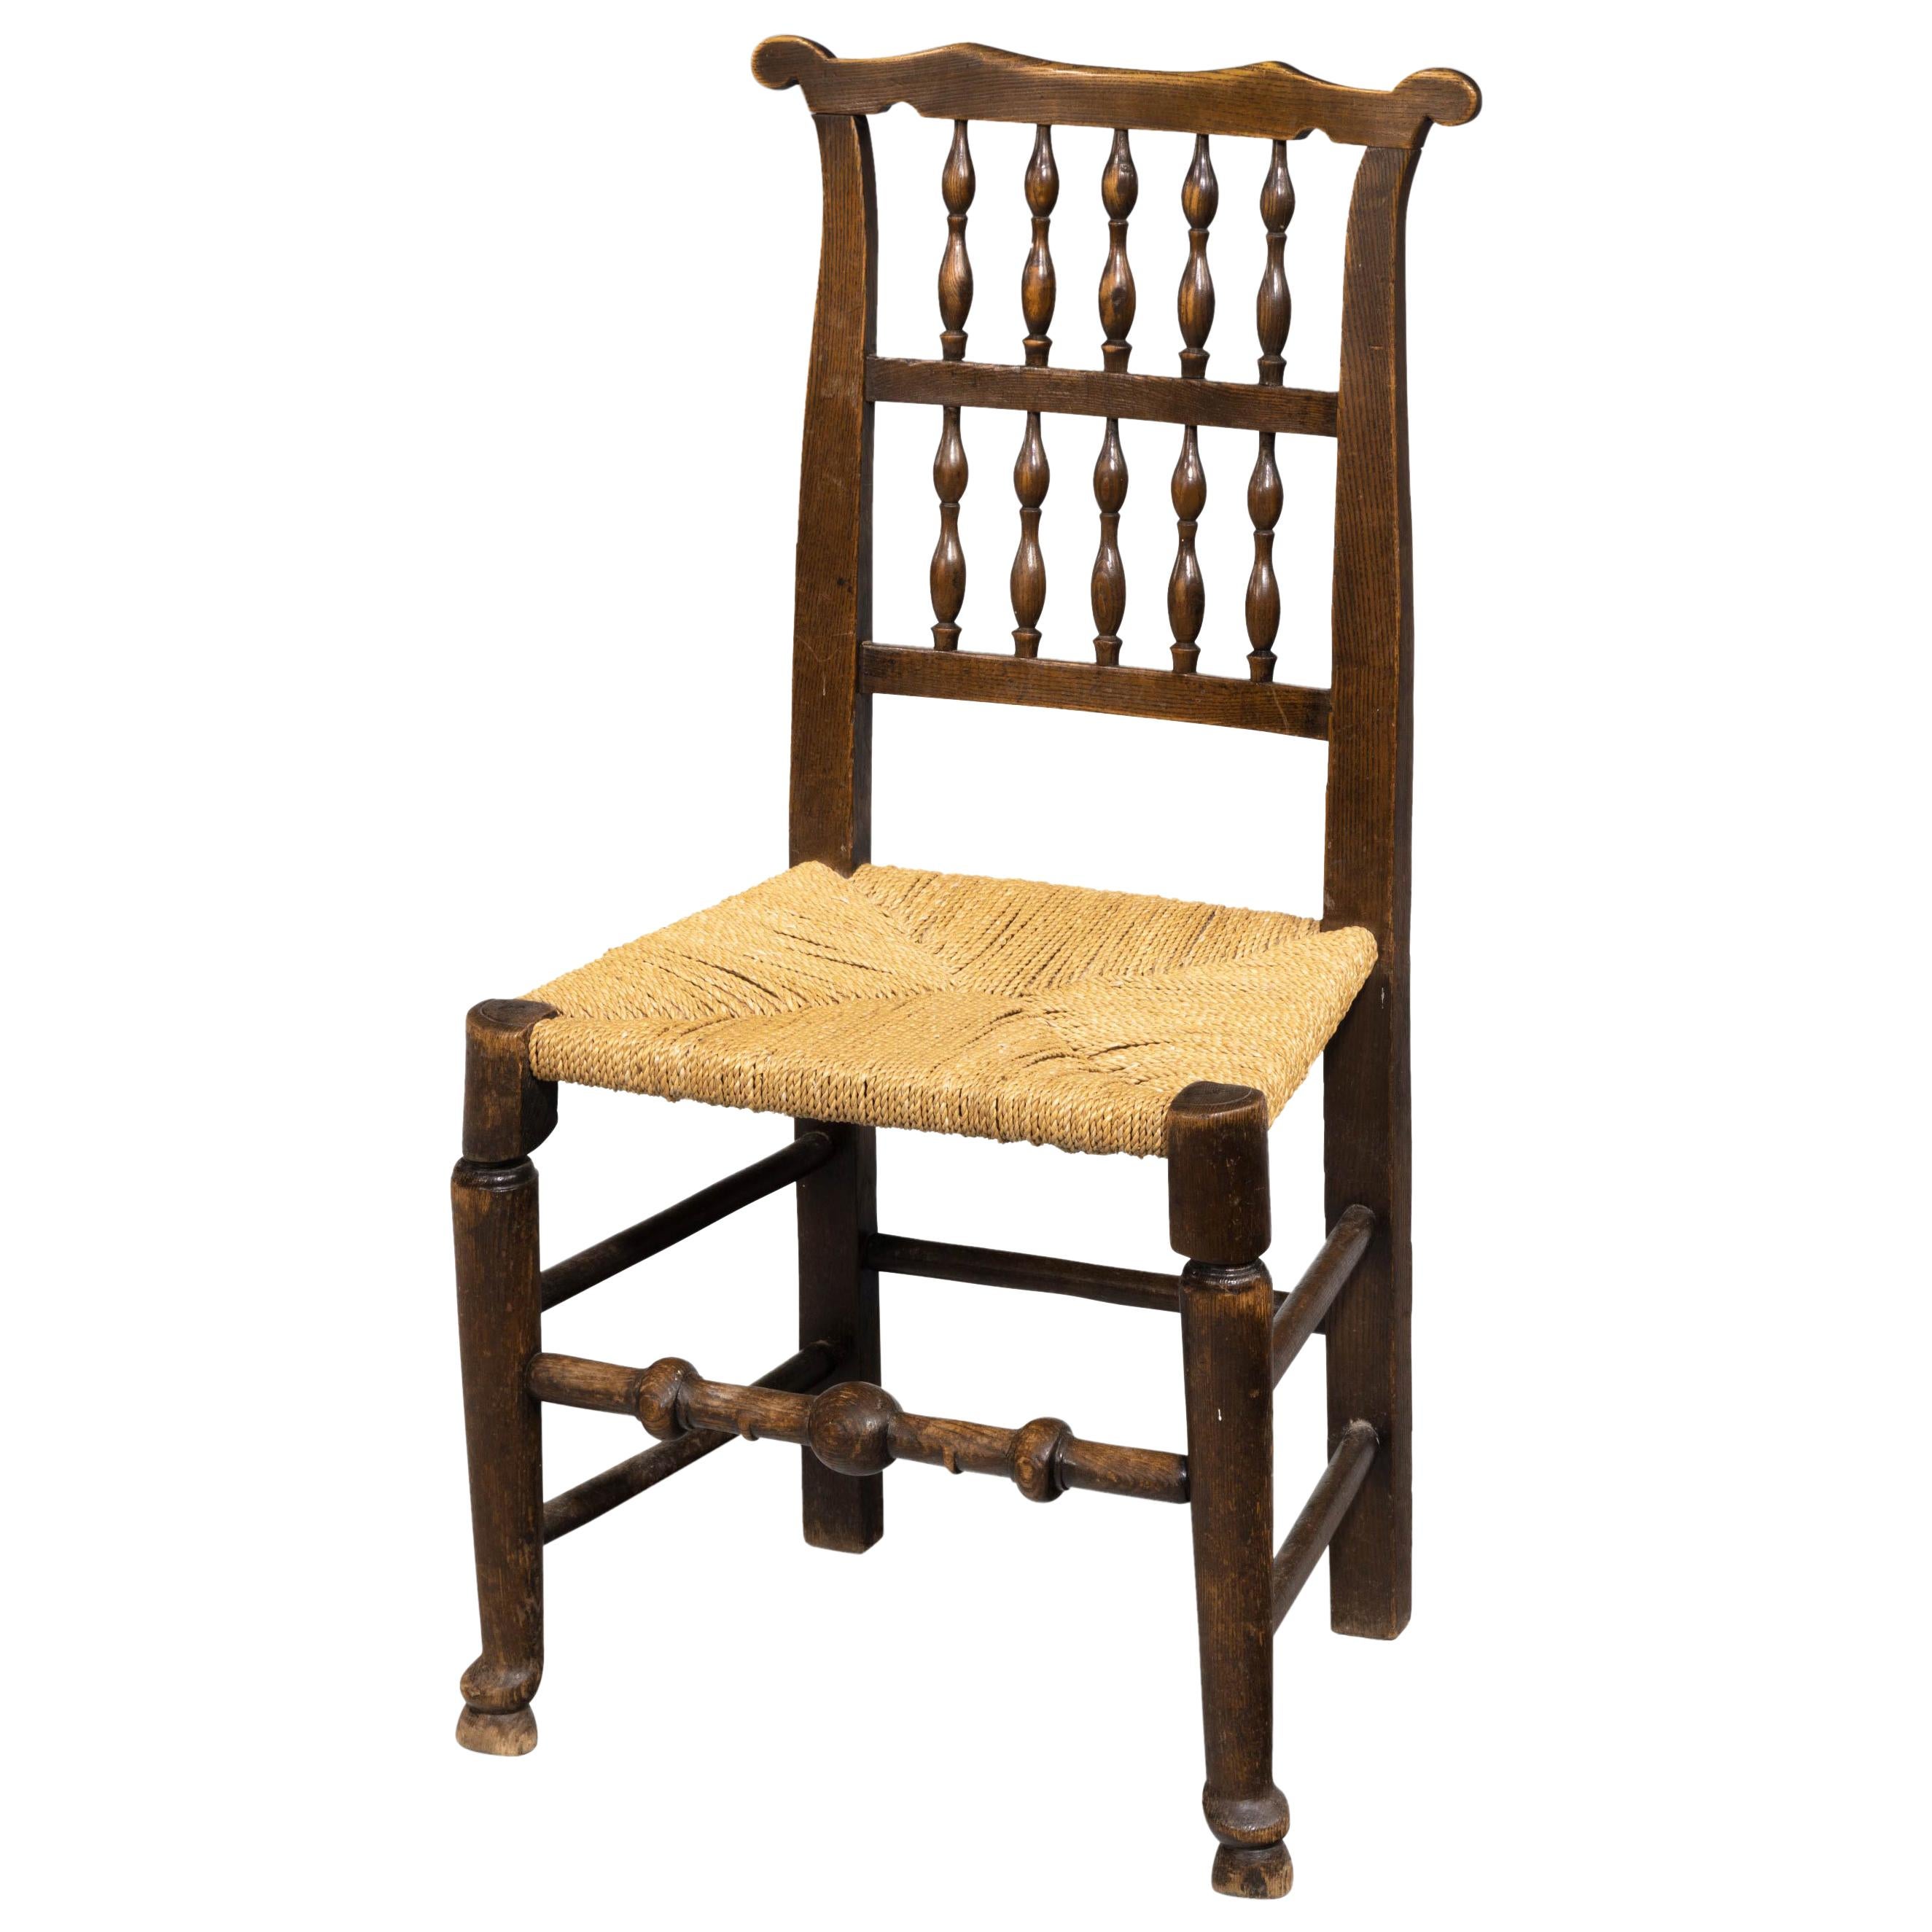 Attractive Mid-19th Century Elm Spindleback Chair